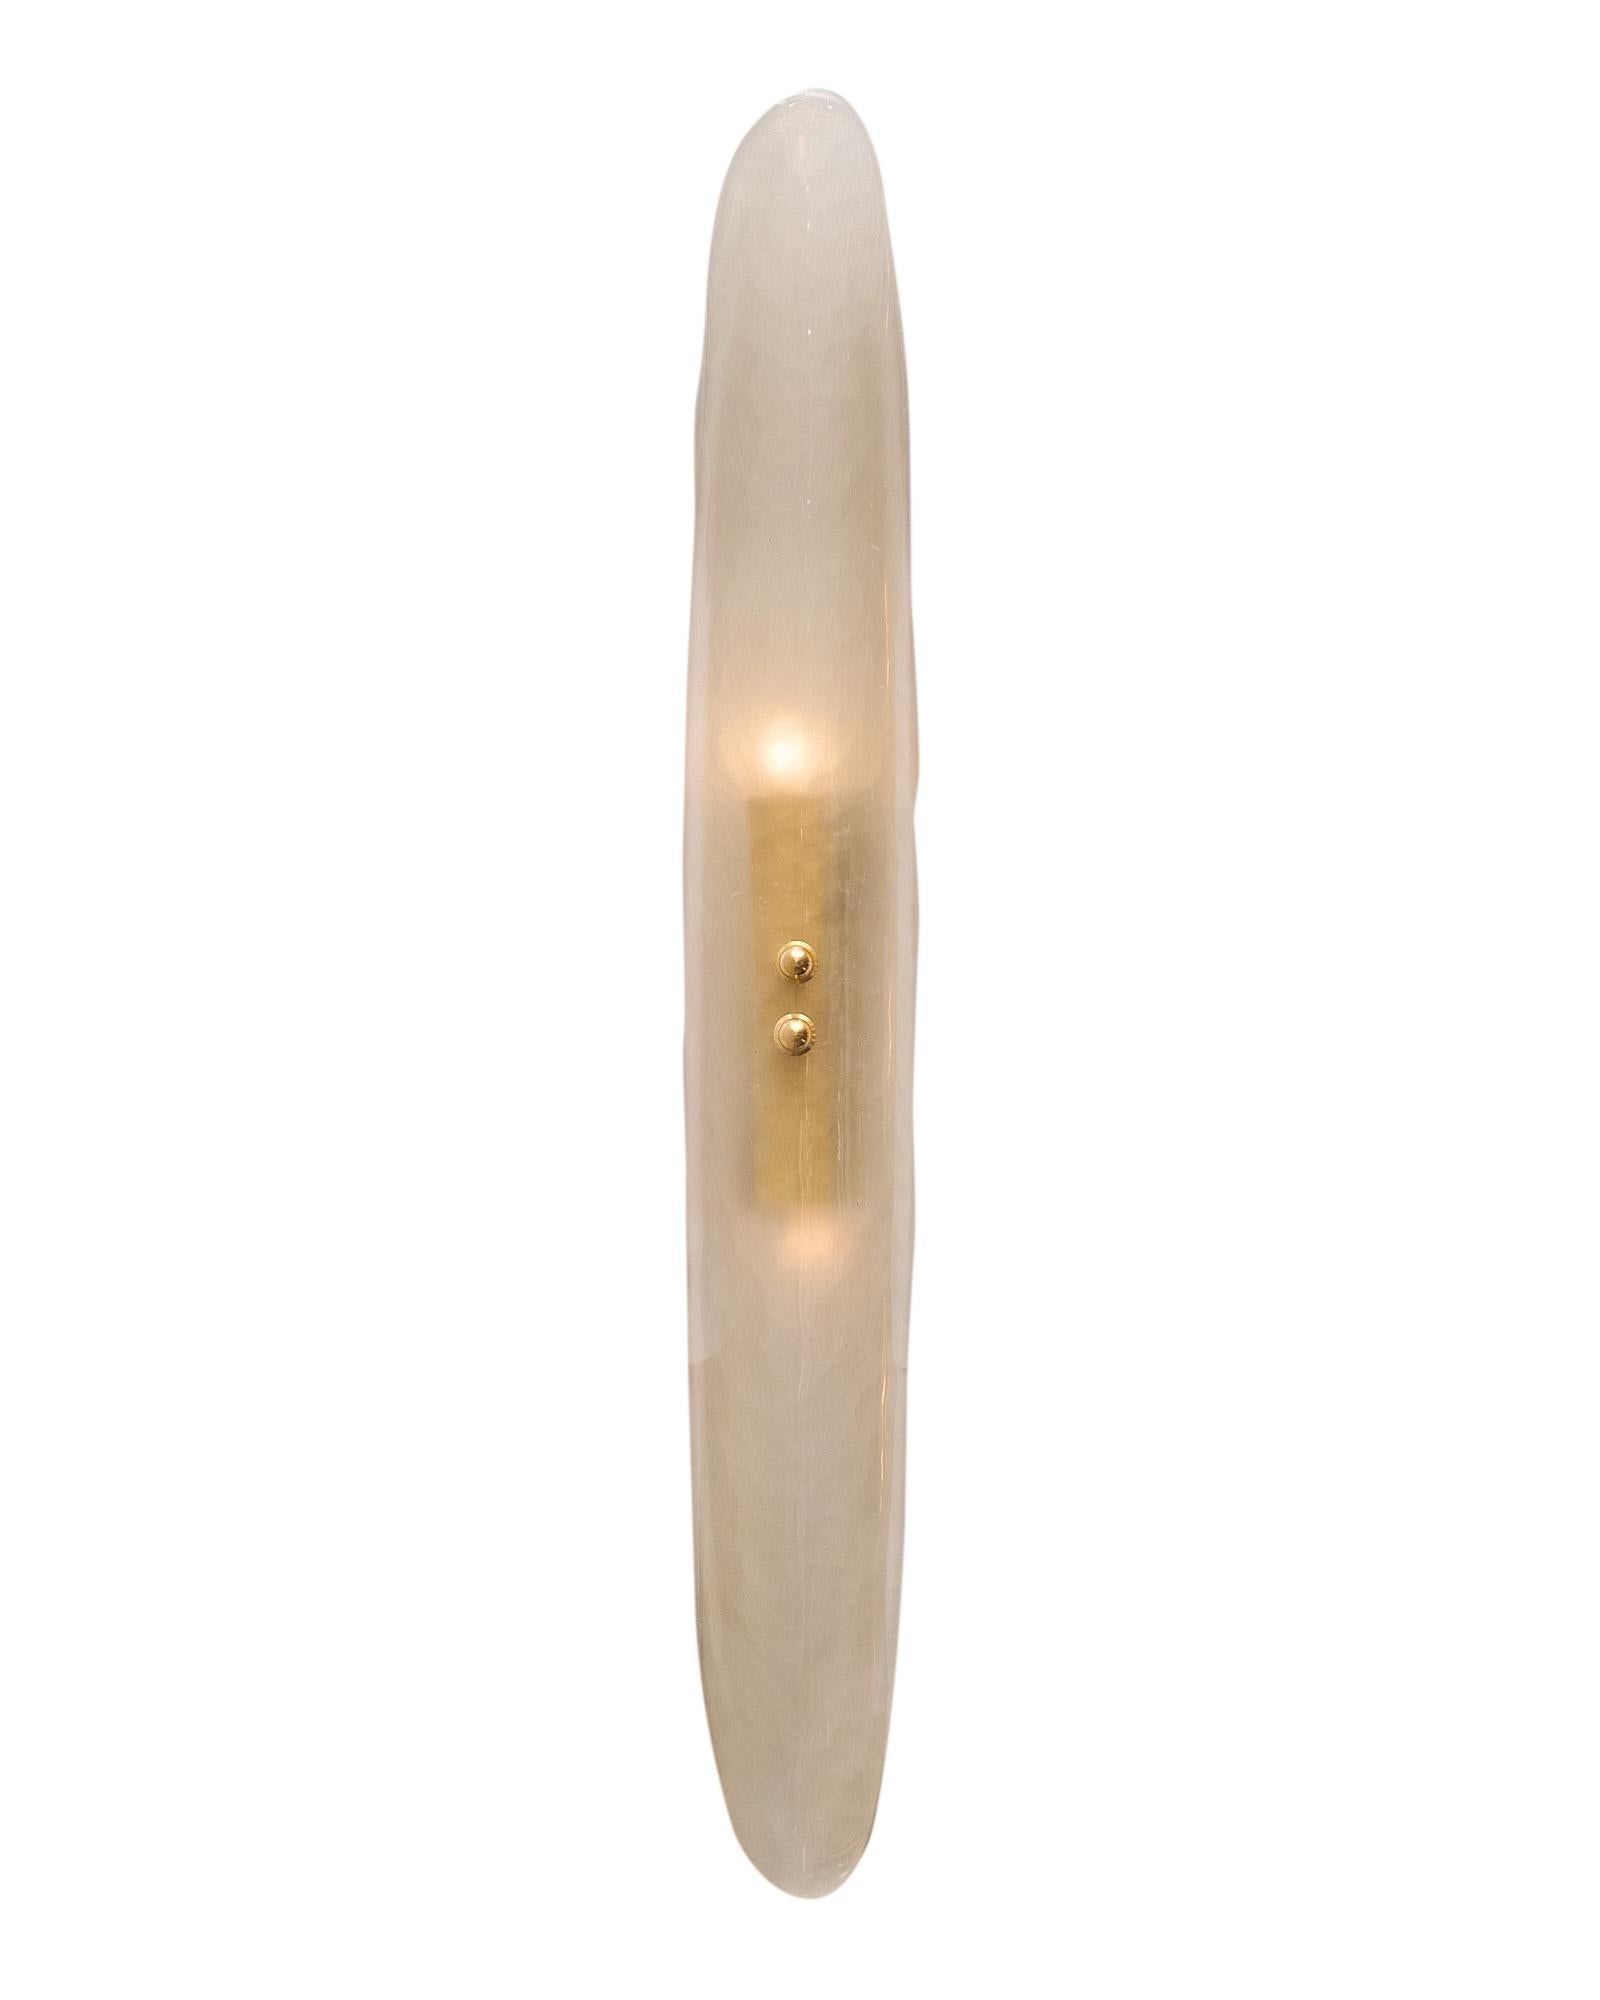 Pair of Murano glass sconces, each crafted with a single curved panel of hand-blown smoked glass on a brass frame. We love the modern style and hand-crafted quality of these sconces. They have been newly wired to fit US standards.
This pair is a